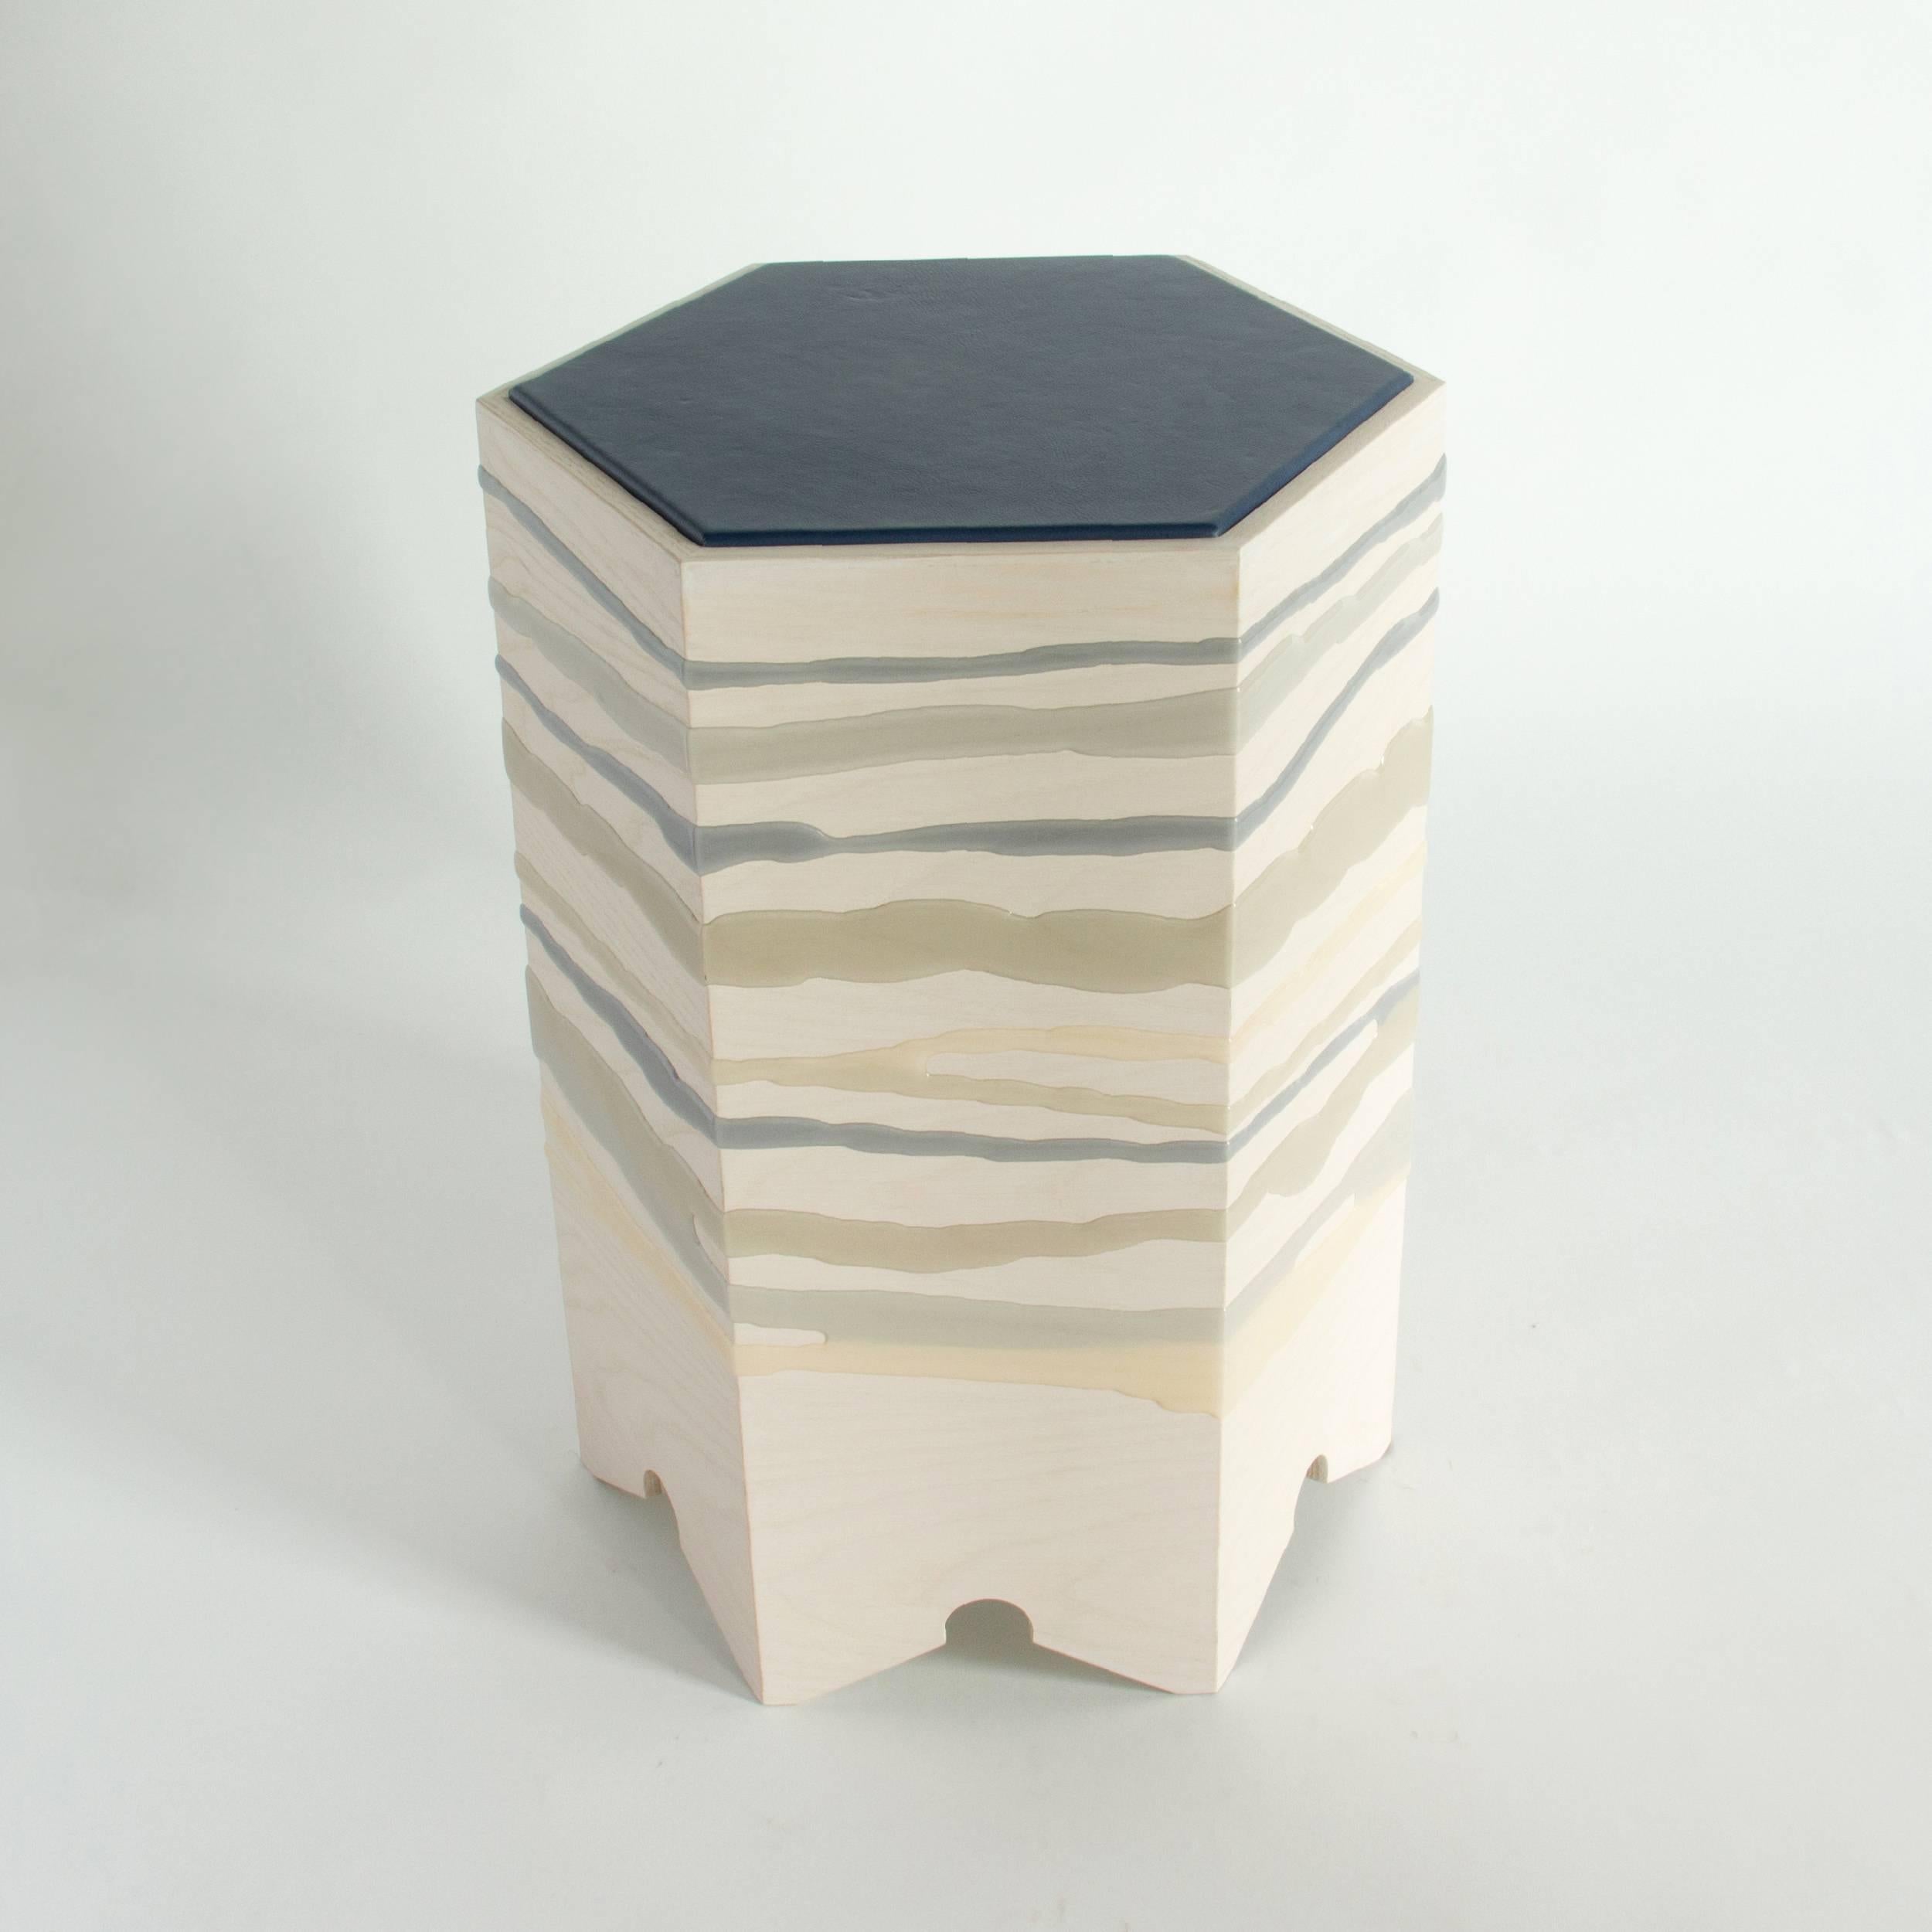 The drip/fold side table by Noble Goods is constructed of a single sheet of ash plywood that has been hand-dripped with liquid resin, and then bent into a hexagonal shape. Finished with a leather upholstered top. The distinct but overlapping blues